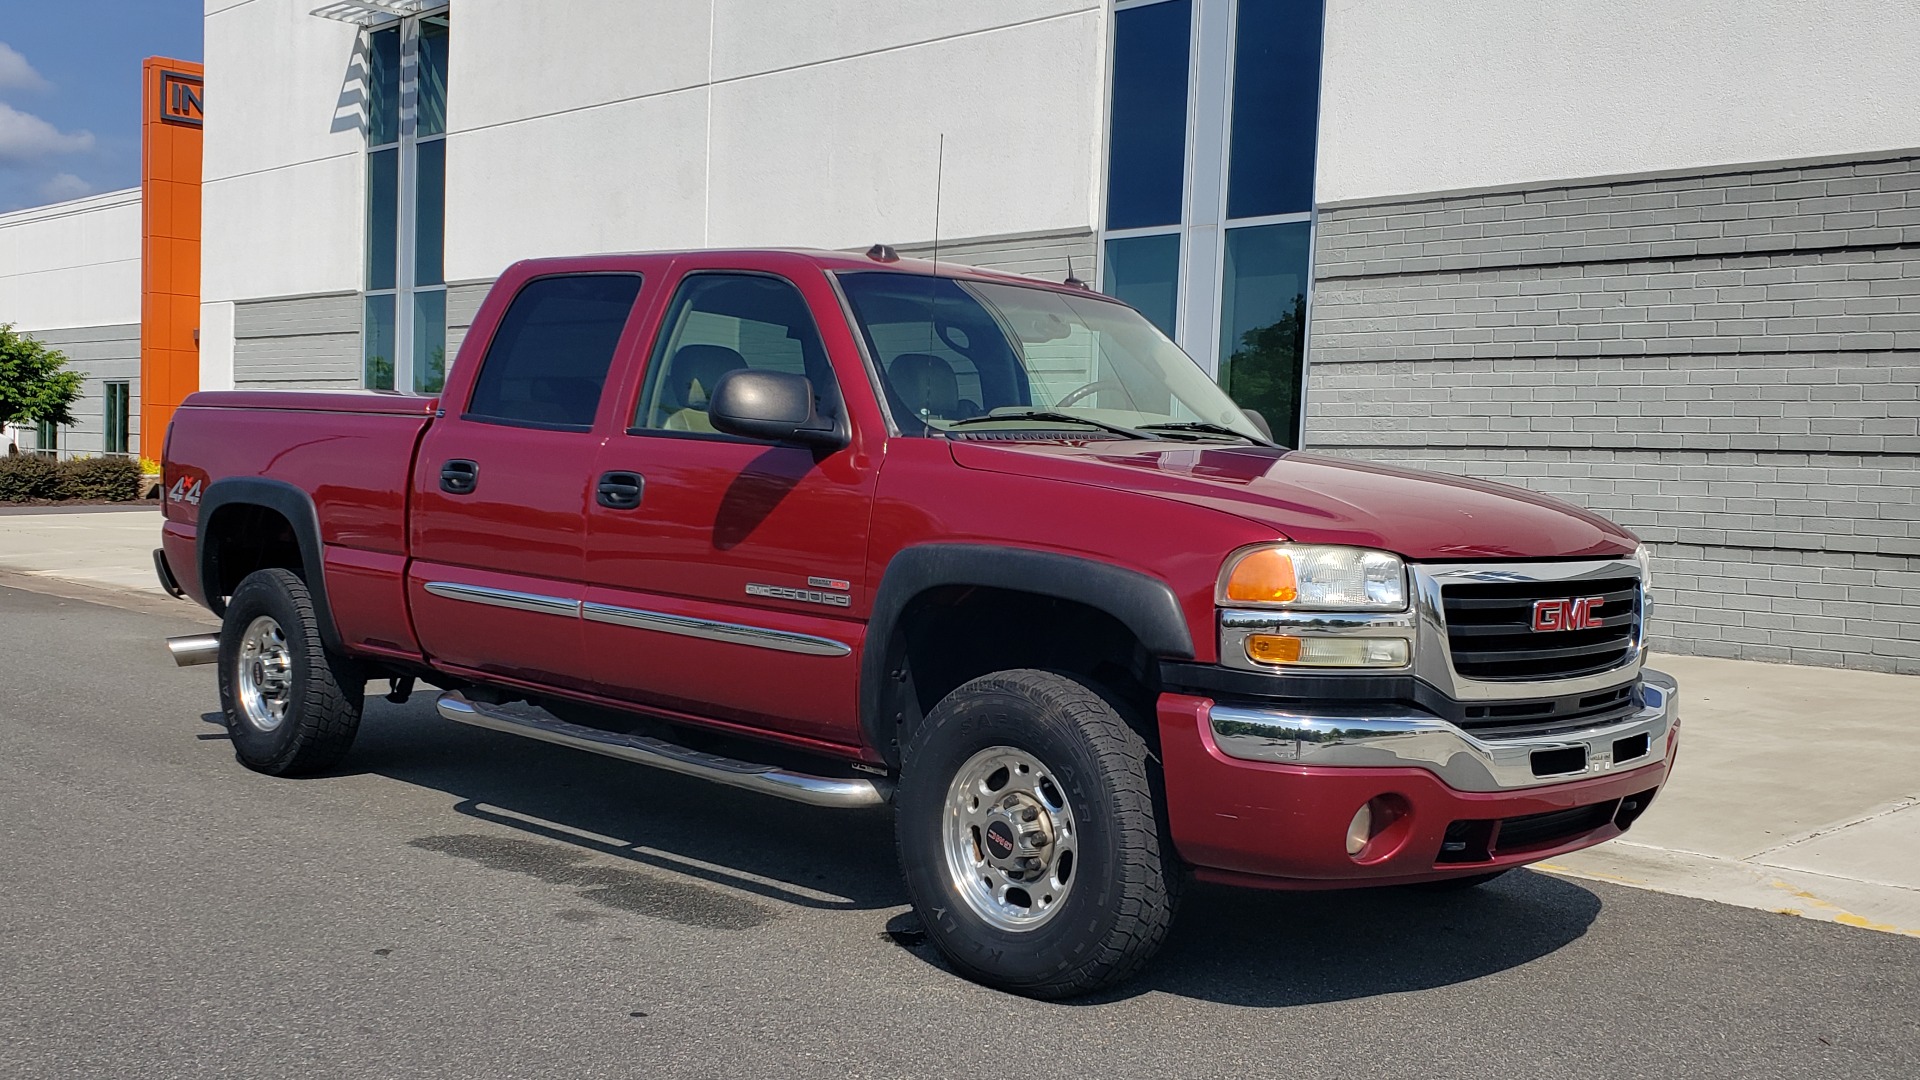 Used 2005 GMC SIERRA 2500HD SLT 4X4 / 6.6L DURAMAX / 5-SPD ALLISON / HEATED SEATS / LEATHER for sale Sold at Formula Imports in Charlotte NC 28227 7